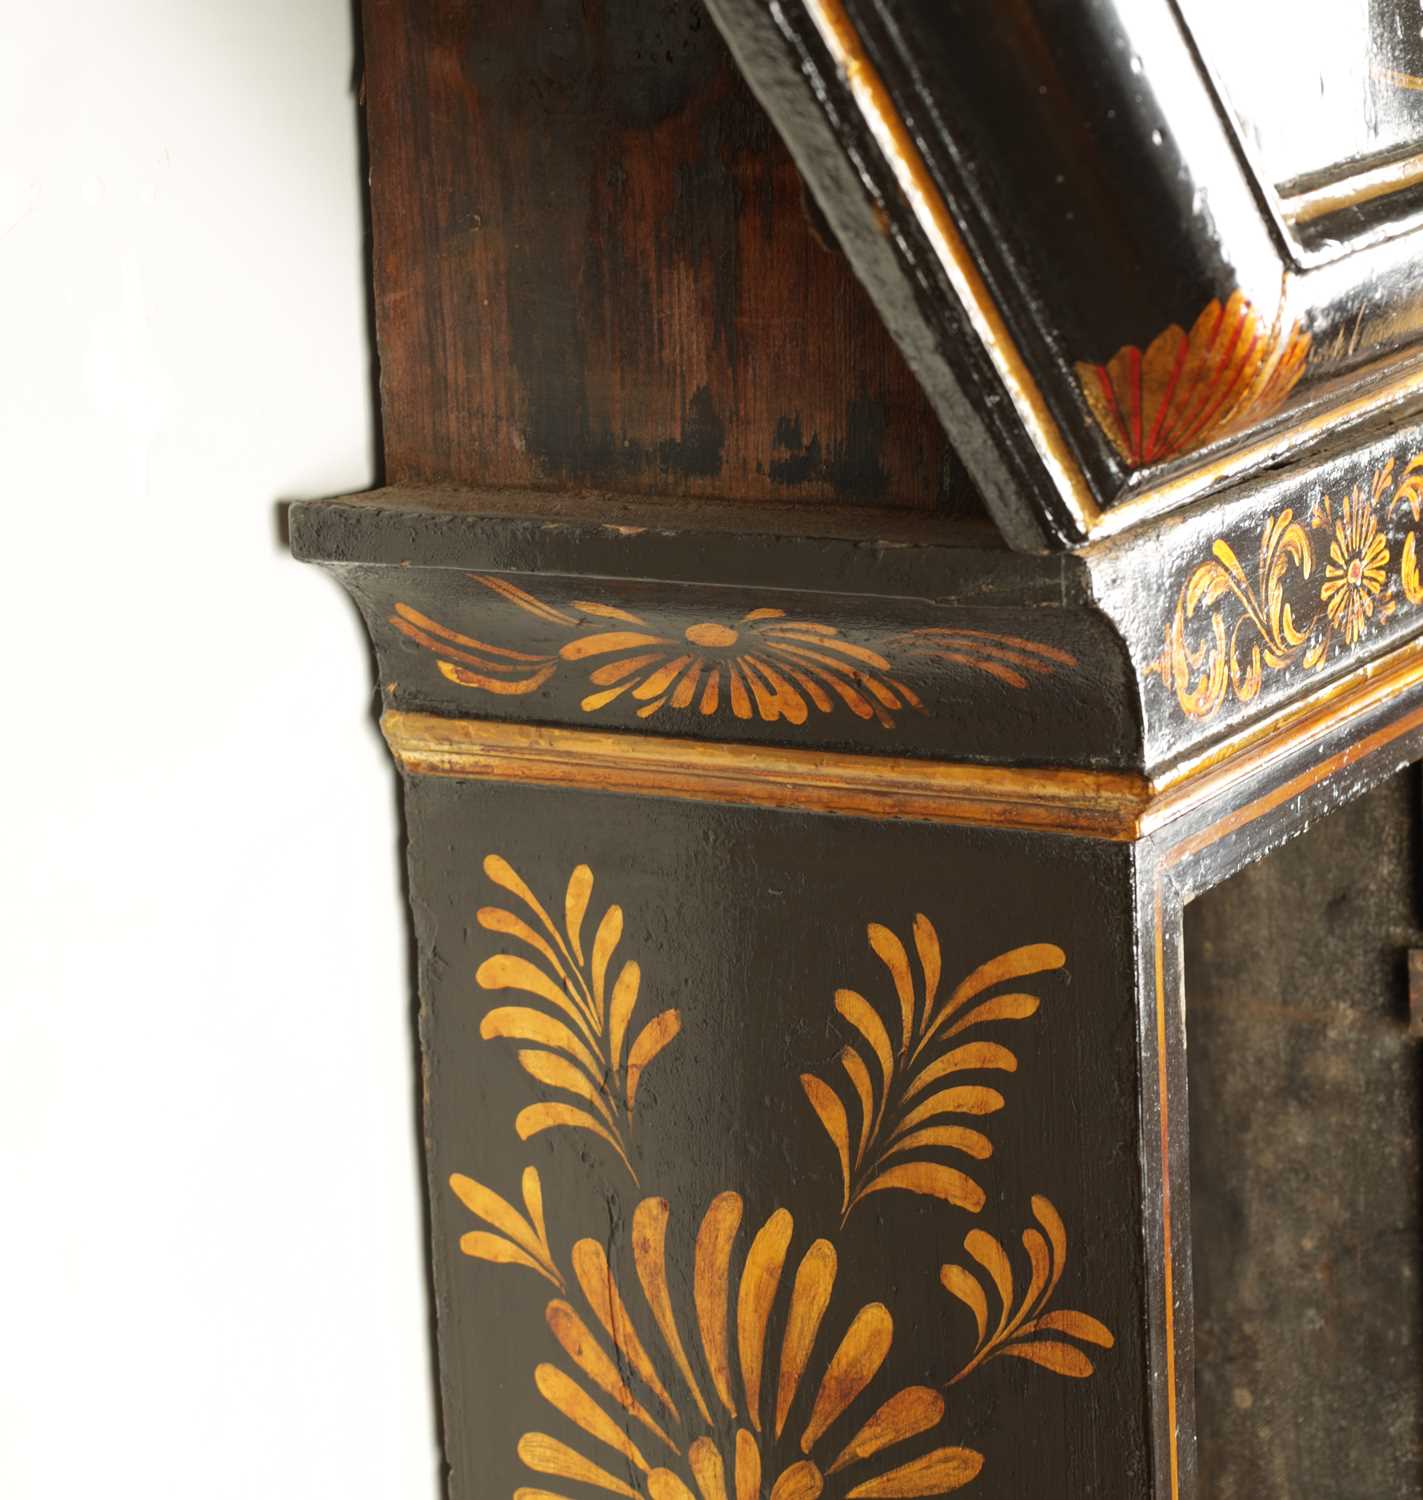 JOHN TICKELL, CREDITON. A RARE EARLY 18TH CENTURY LACQUERED CHINOISERIE TAVERN CLOCK OF LARGE SIZE - Image 8 of 21